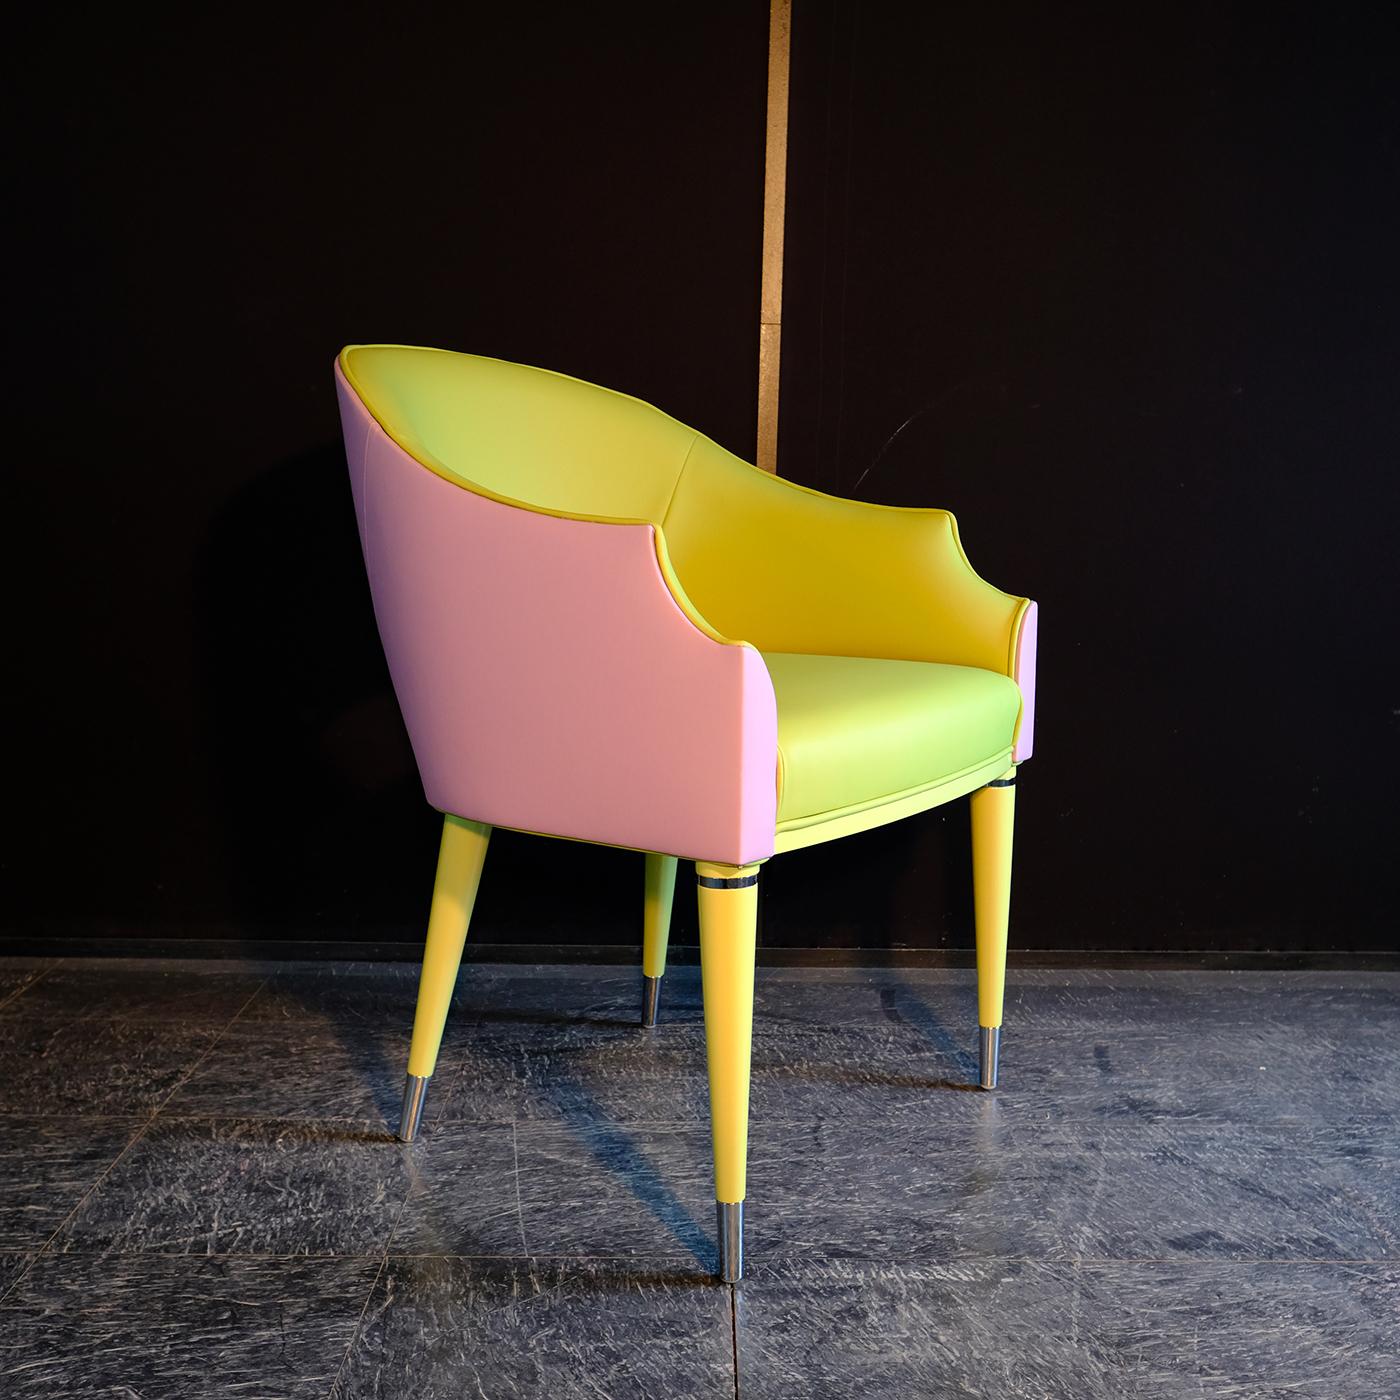 Crast multi-color armchair by Divina Project.